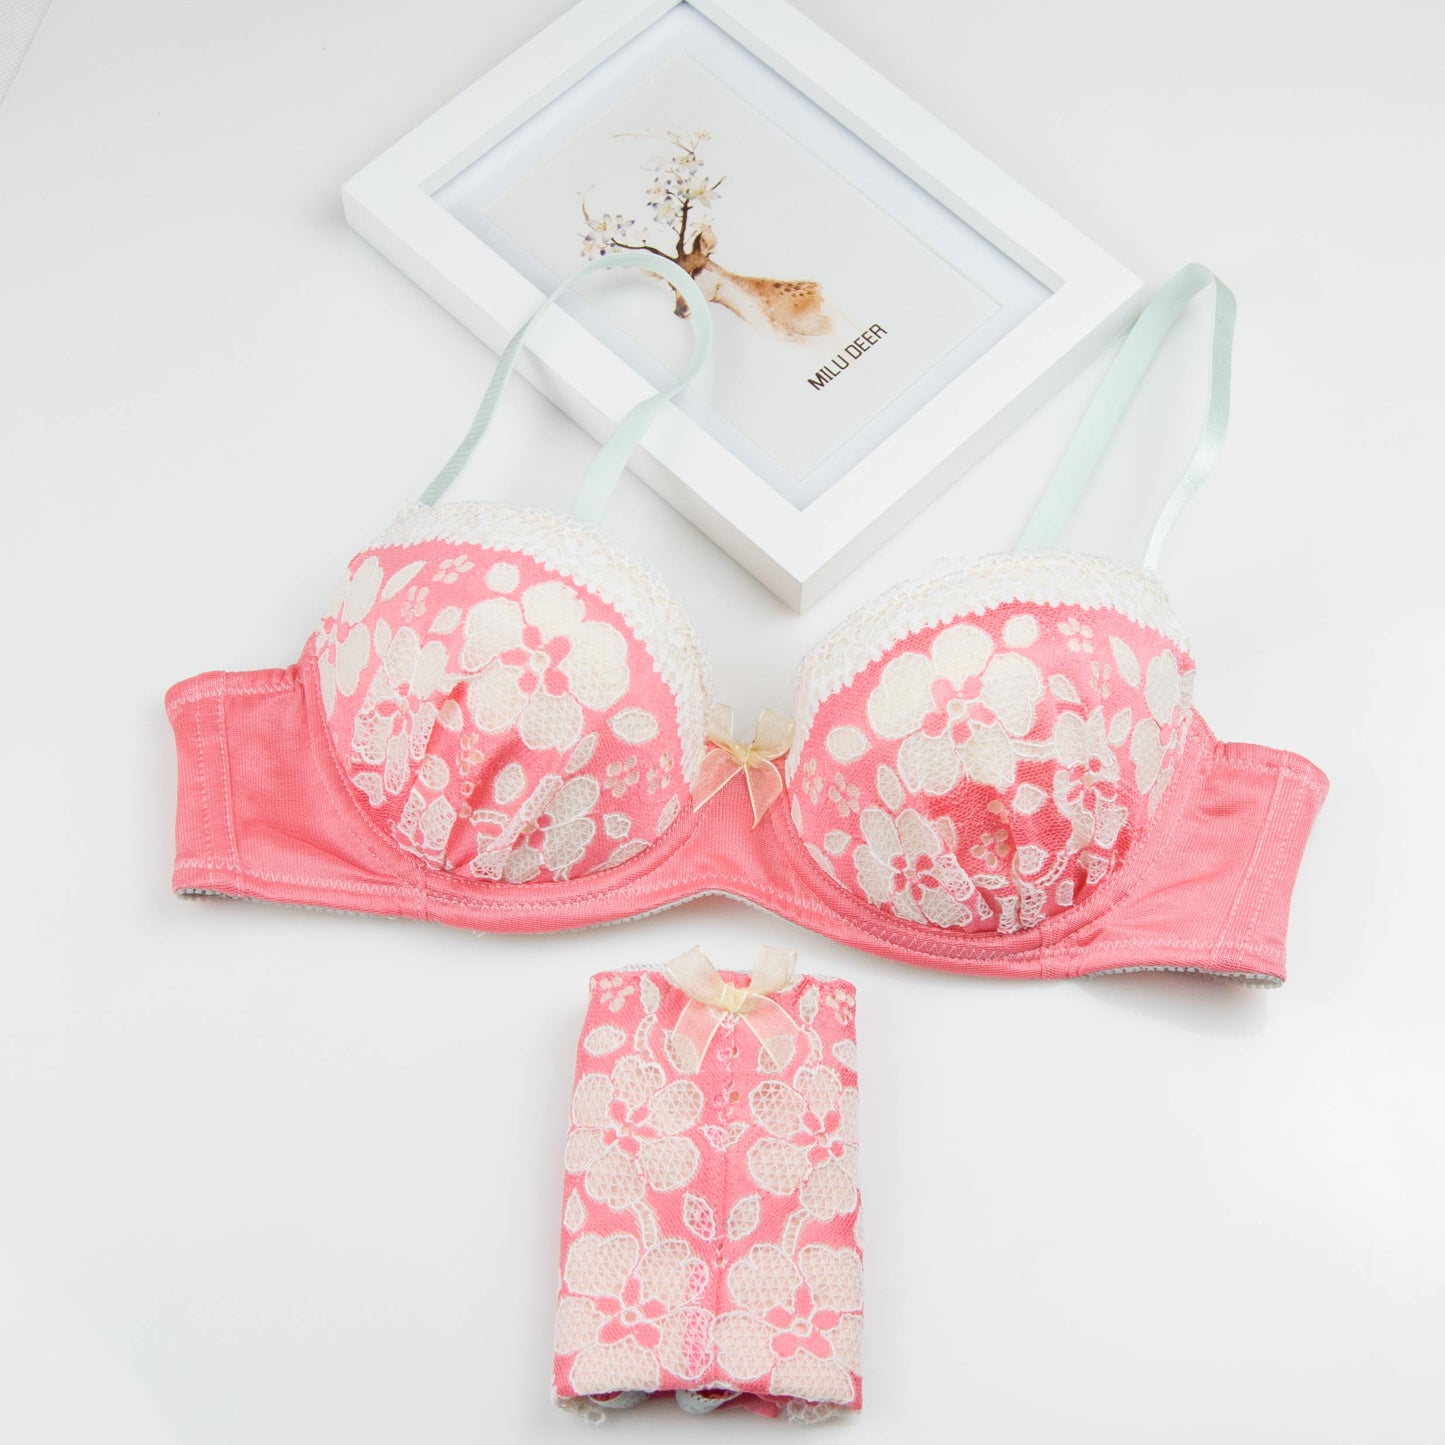 Candy Color Floral Japanese Cute Sweet Bras And Panty Set